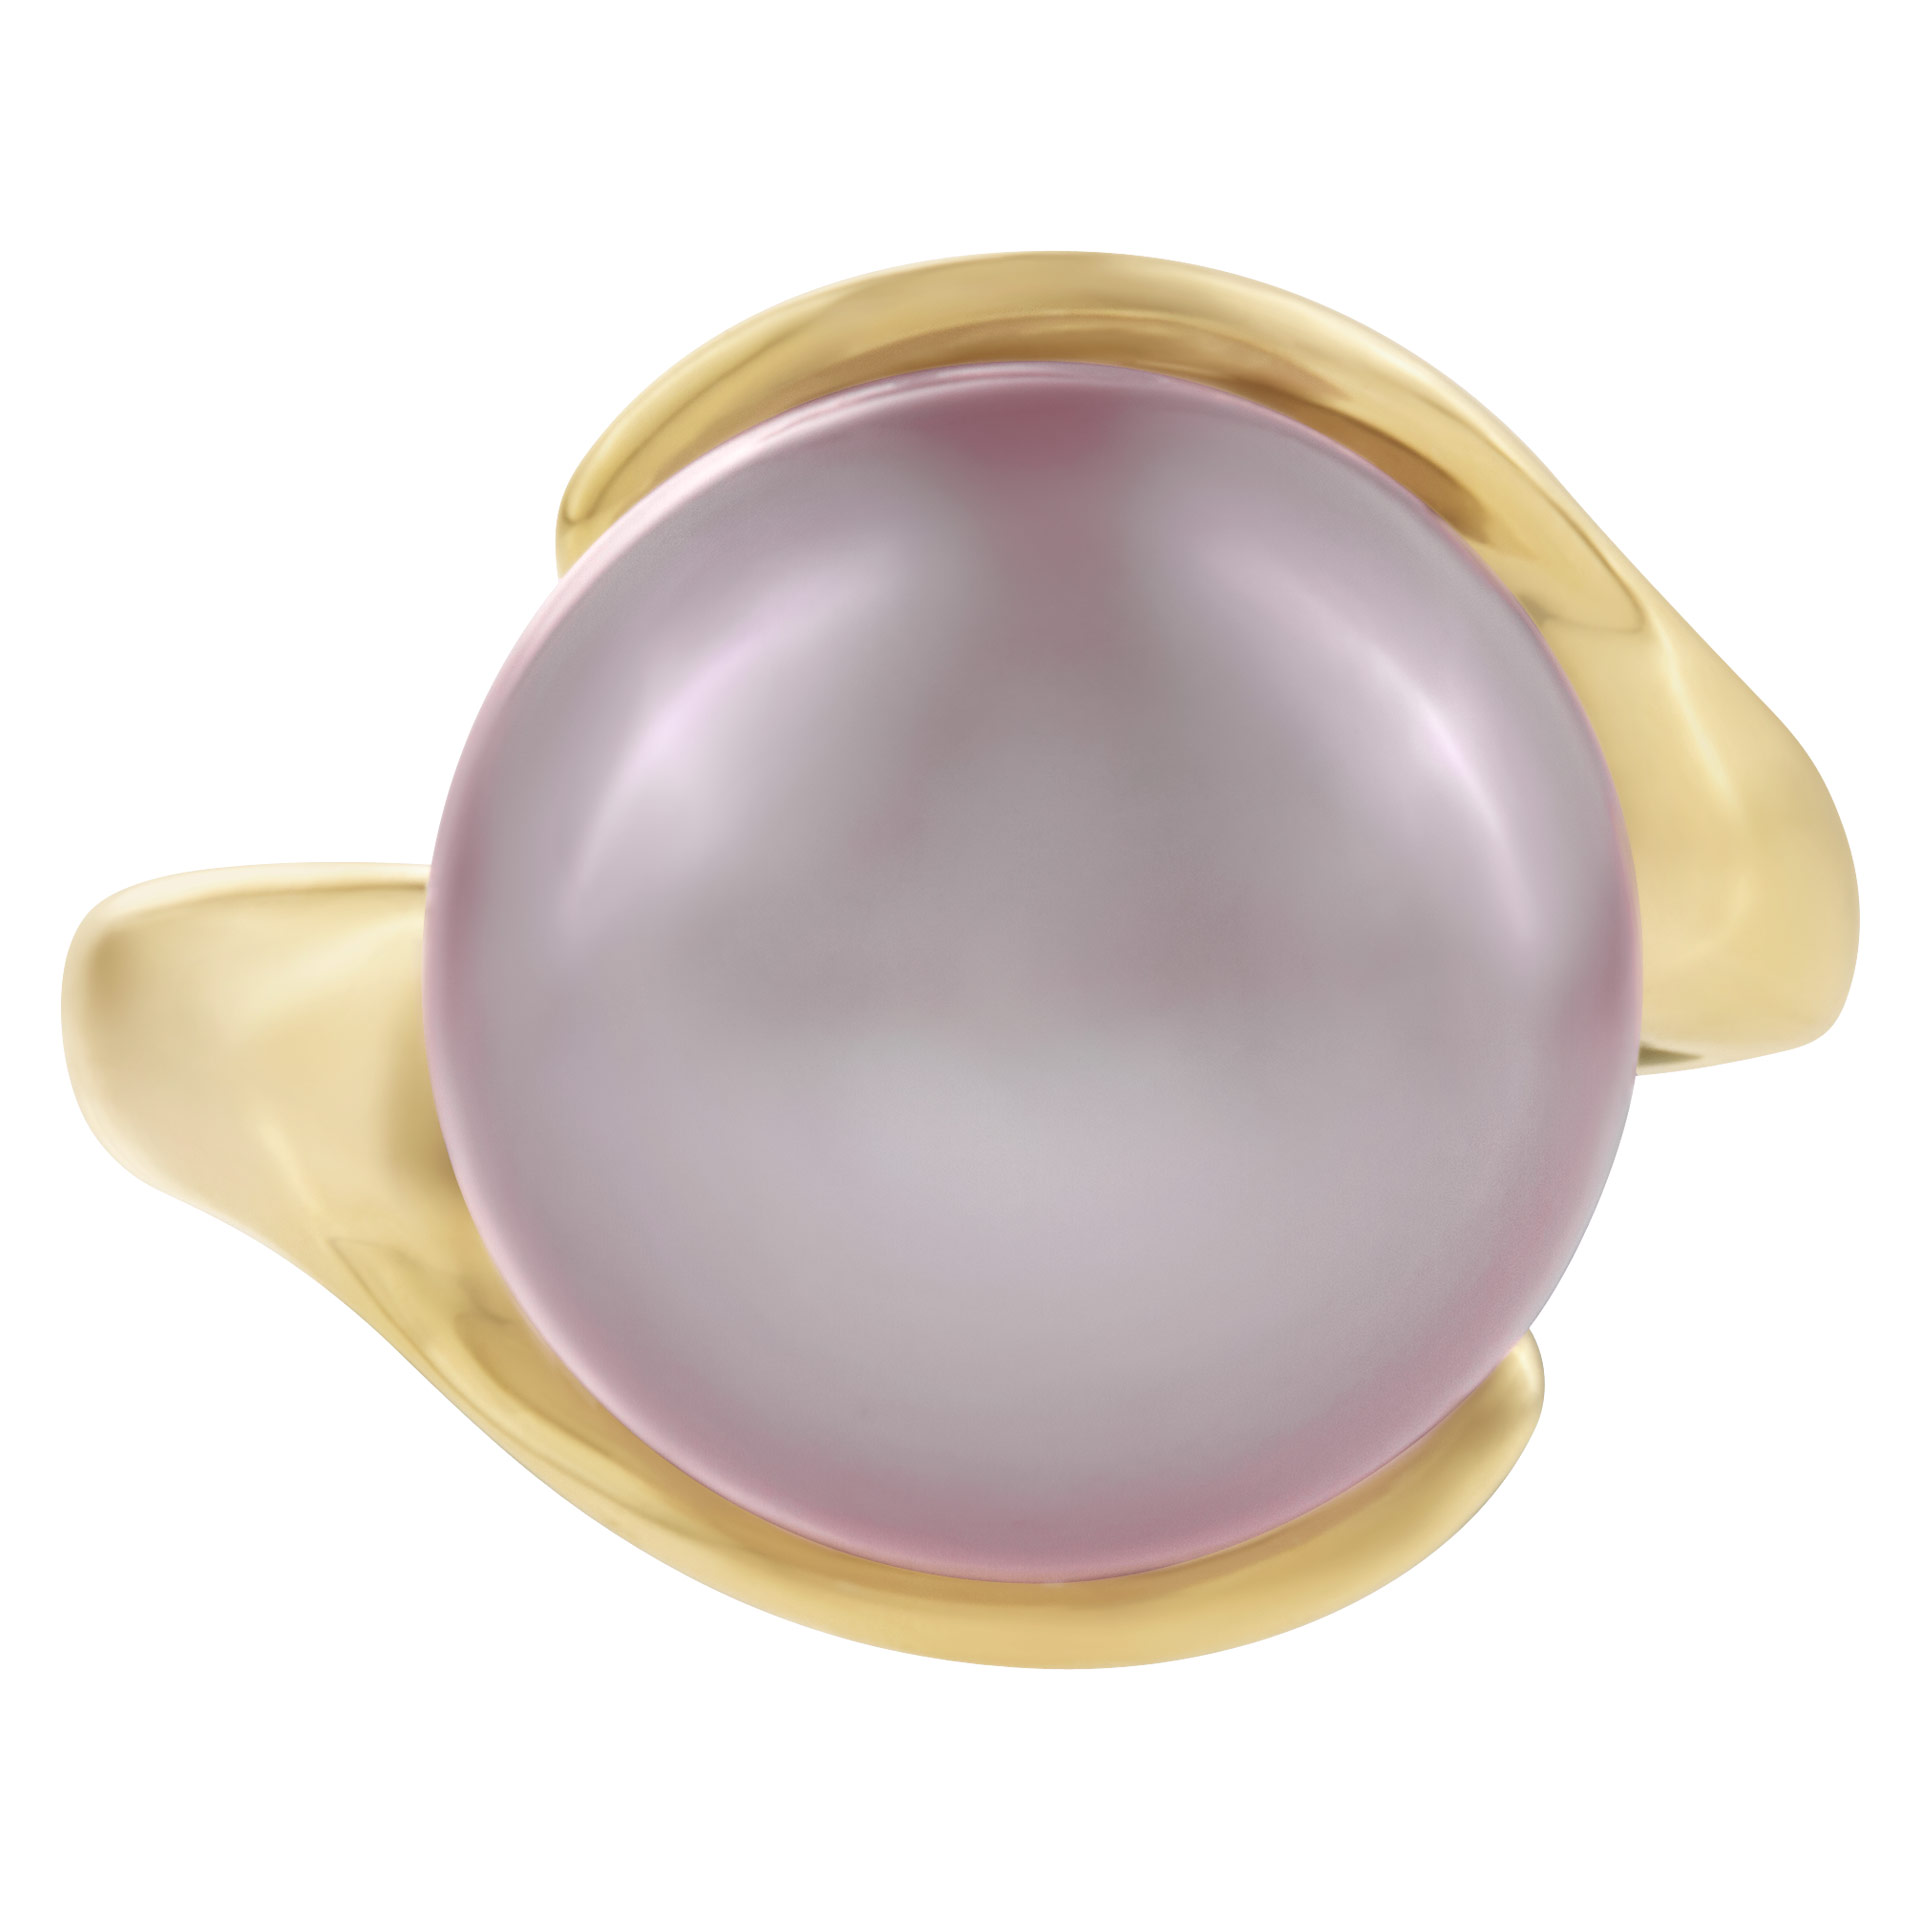 14k yellow gold ring with mauve pearl. Size 7